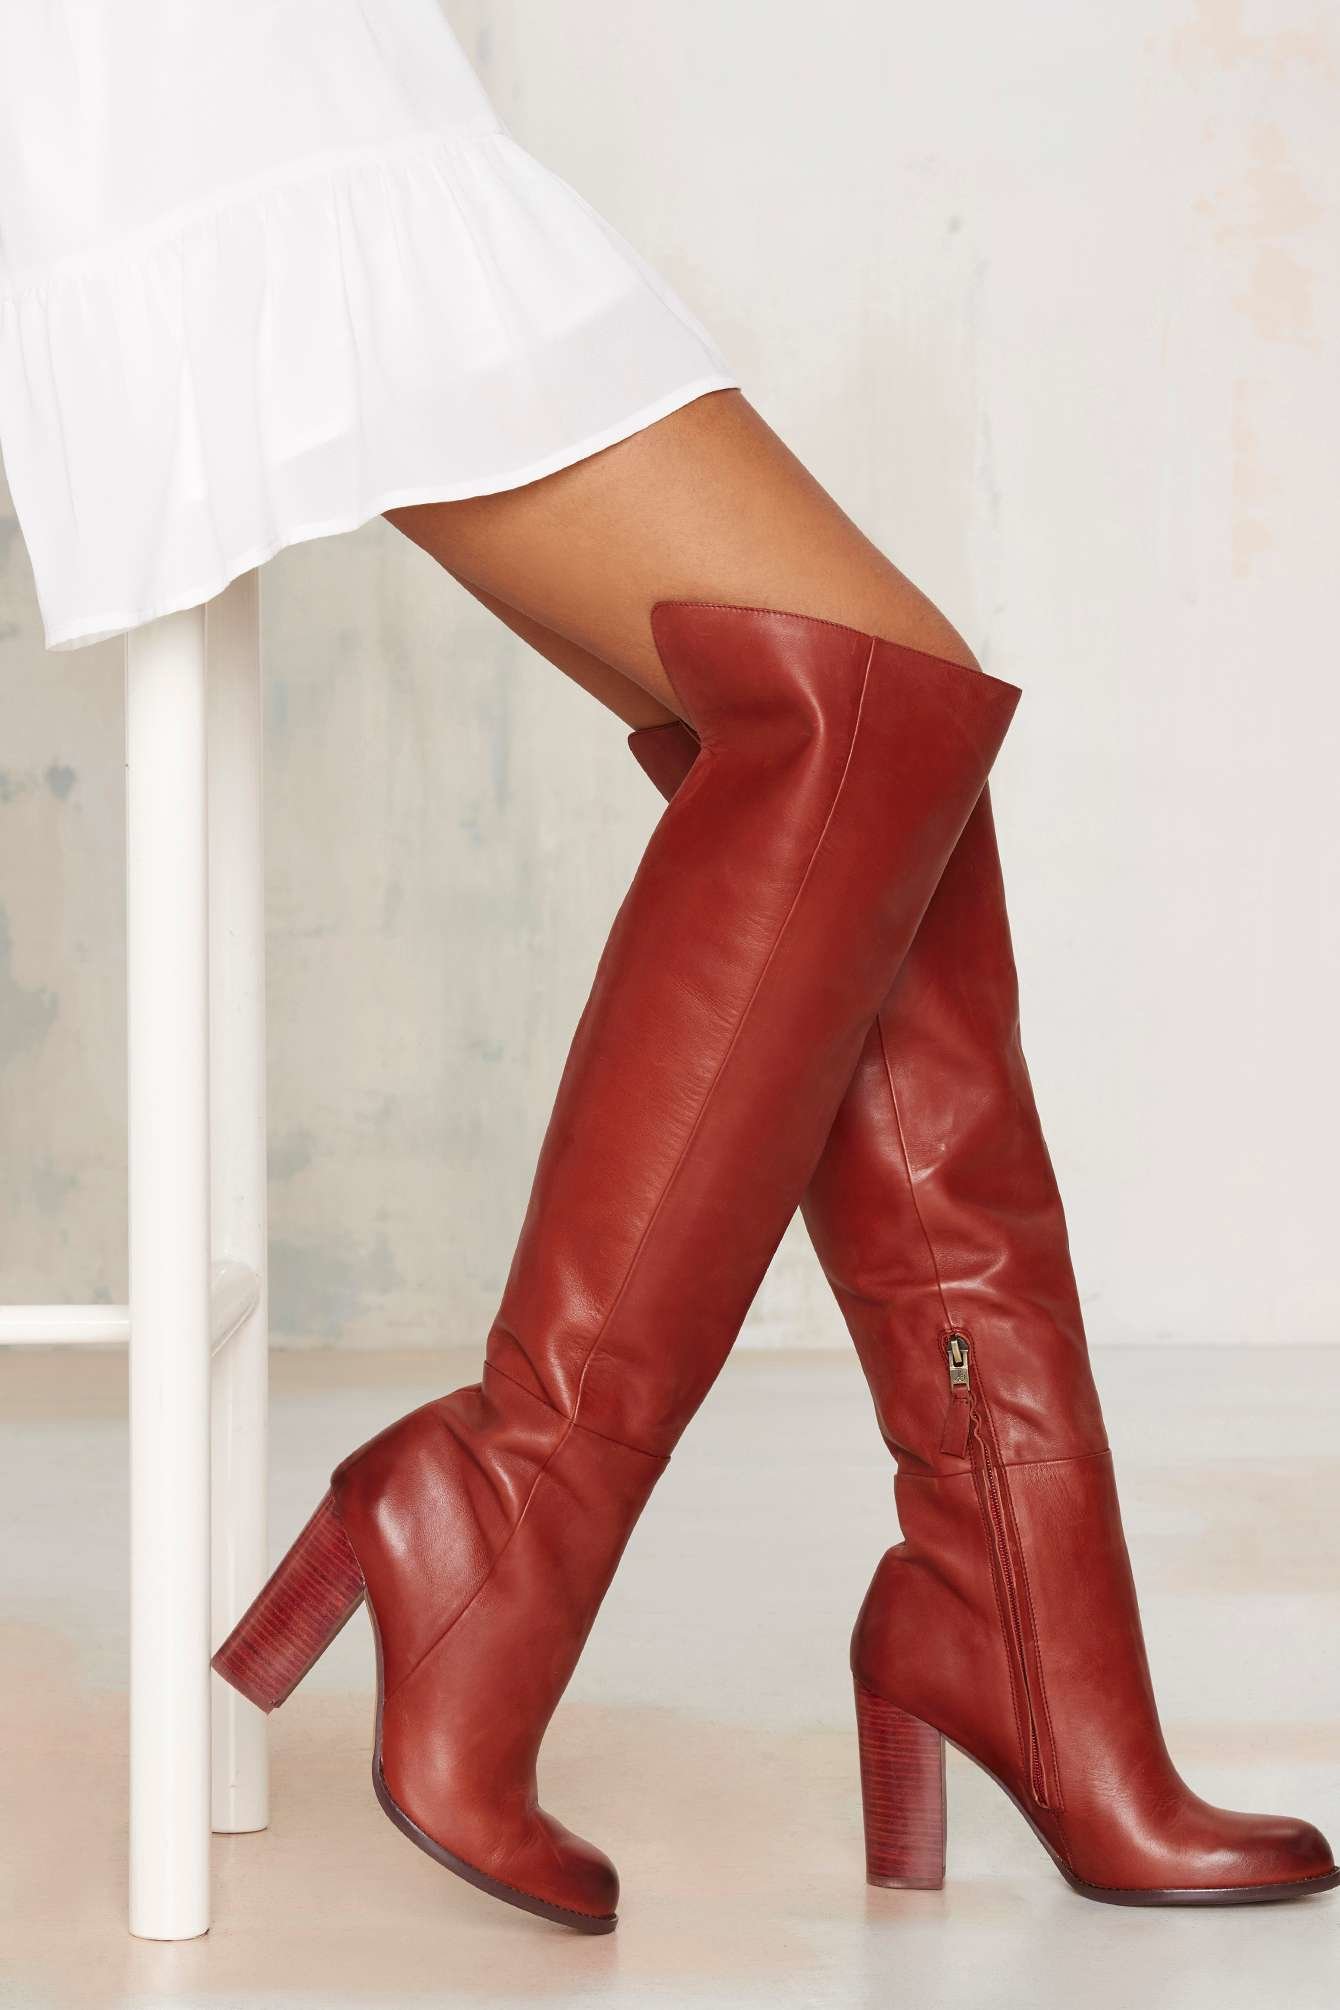 Lyst - Sam Edelman Rylan Knee-high Leather Boot in Red